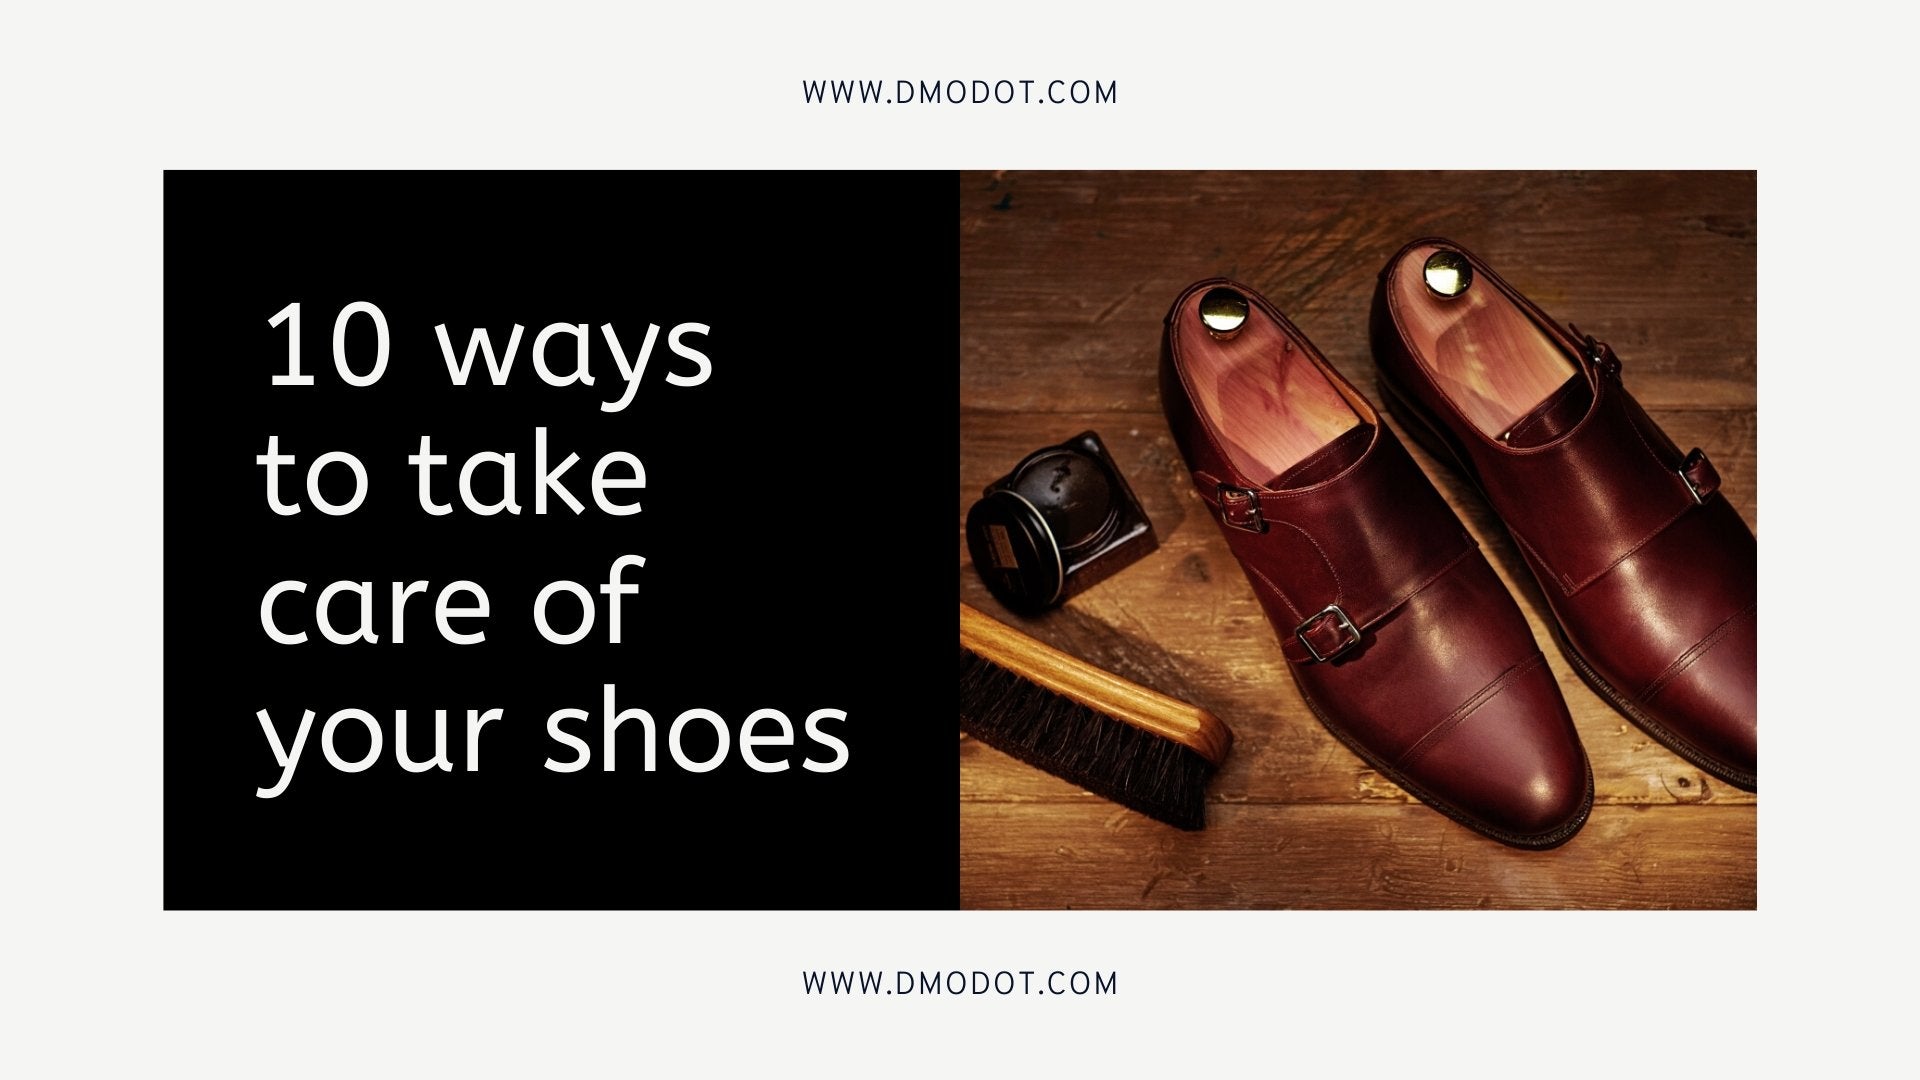 10 Ways to Take Care of your Shoes - dmodot Shoes